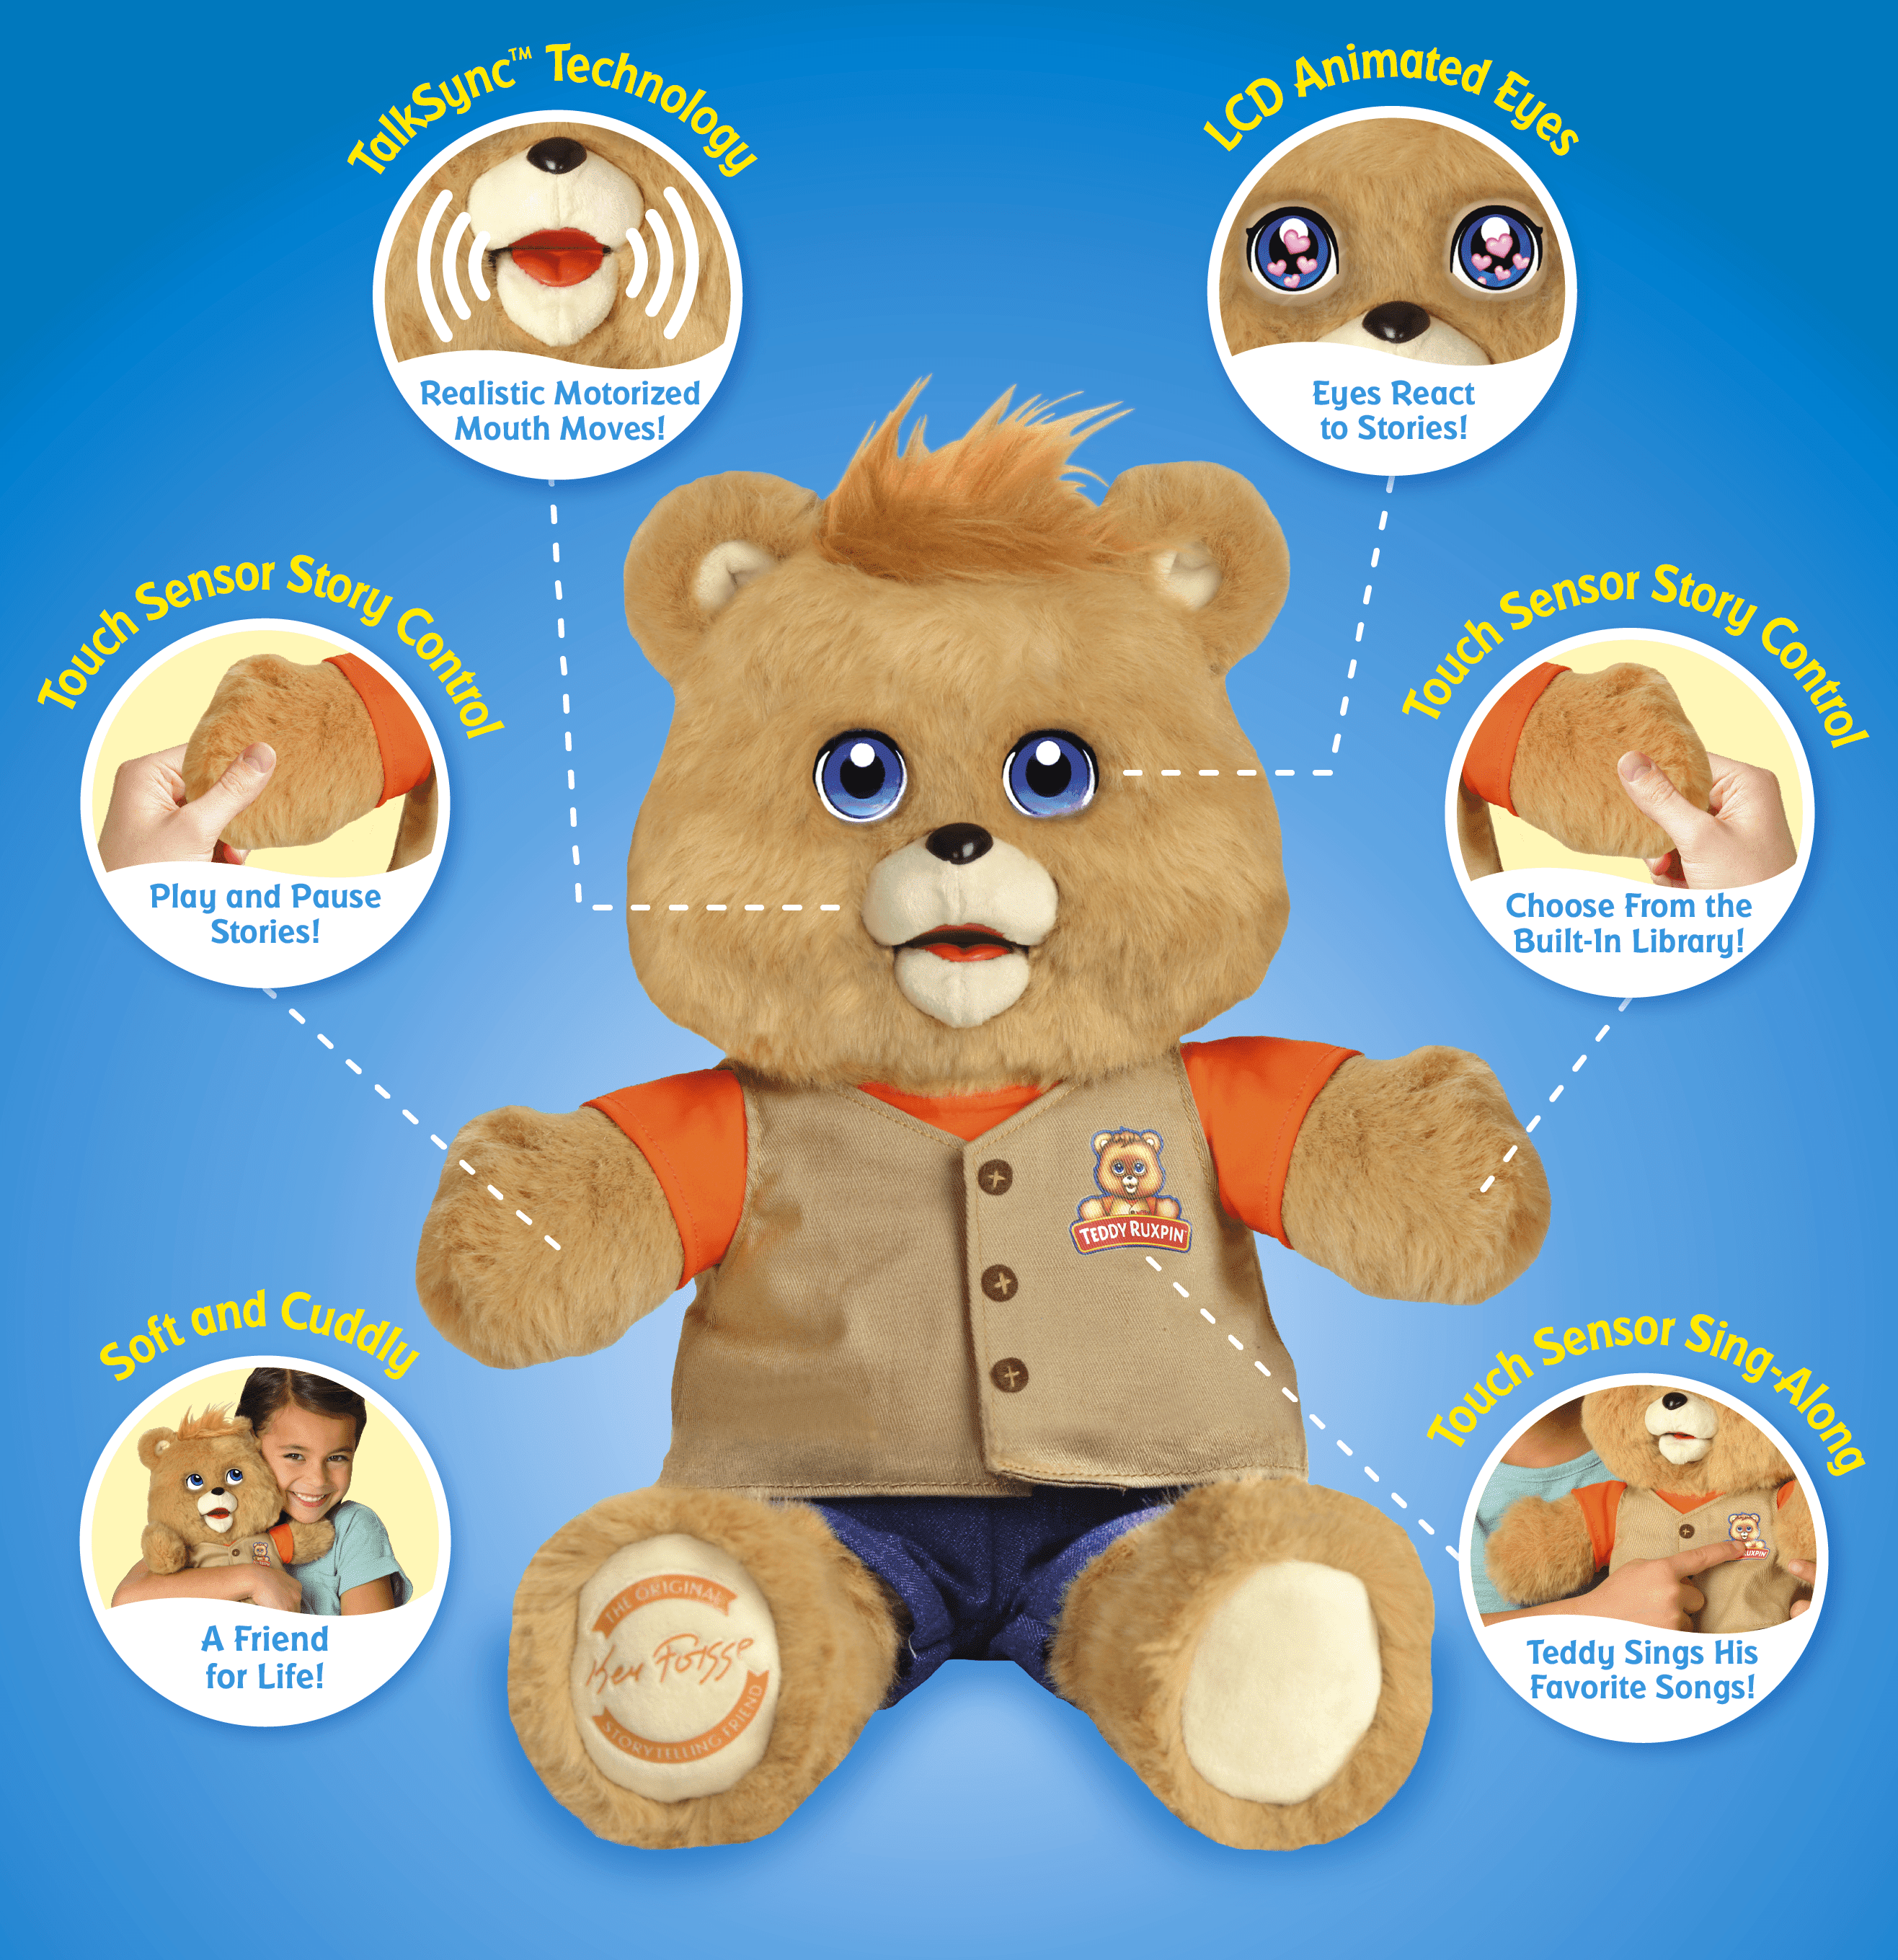 Details about   Vintage Teddy Ruxpin Bear with Sing Along Cartridges And Book 